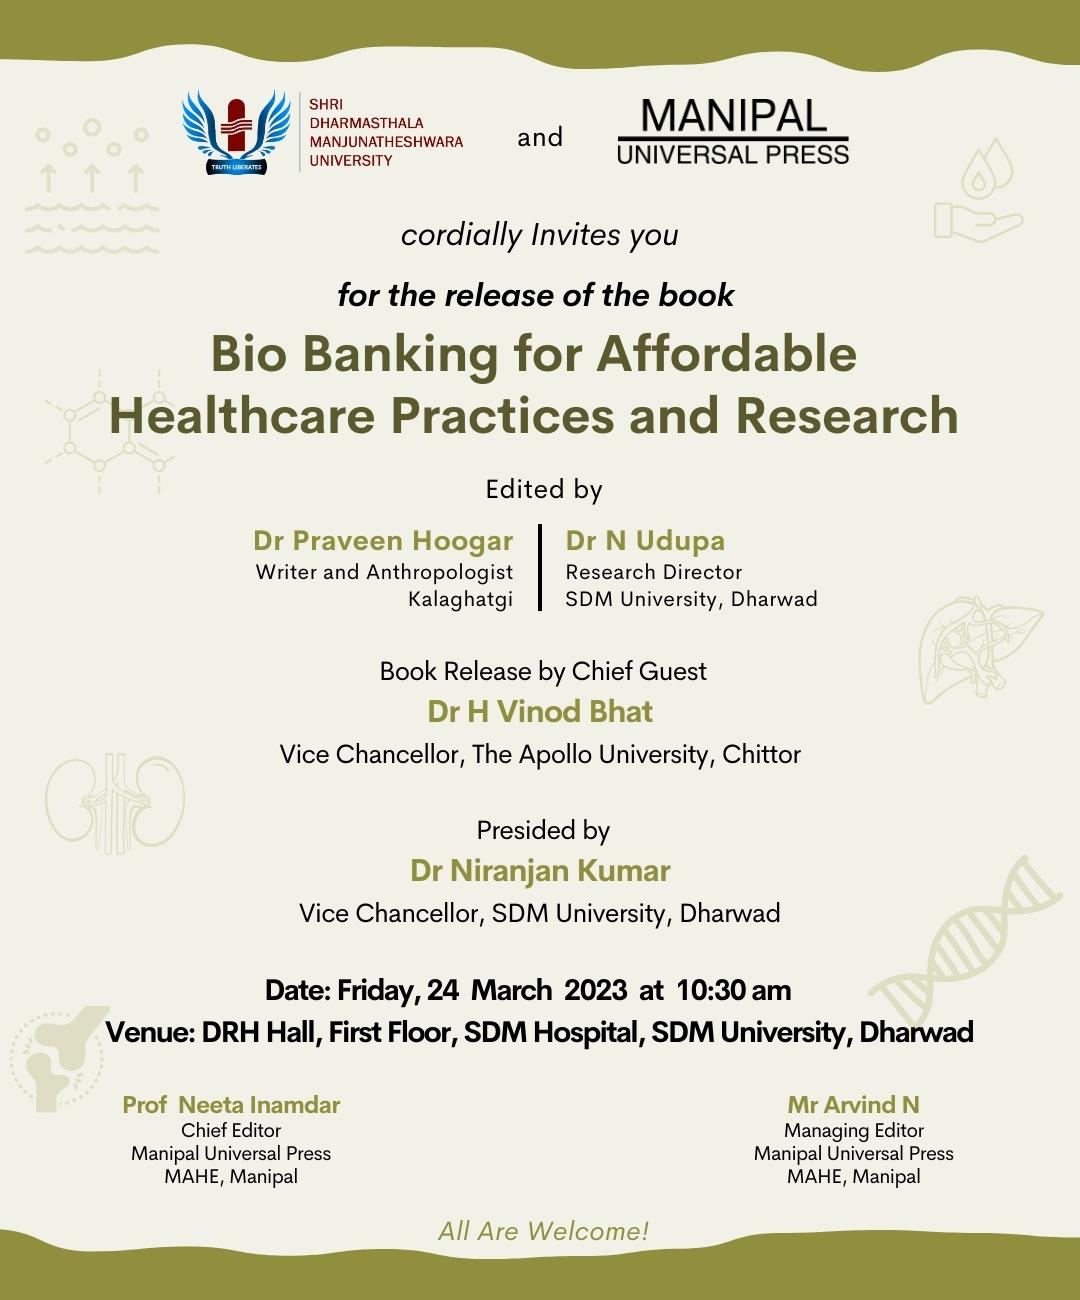 Bio Banking for Affordable Healthcare Practices and Research